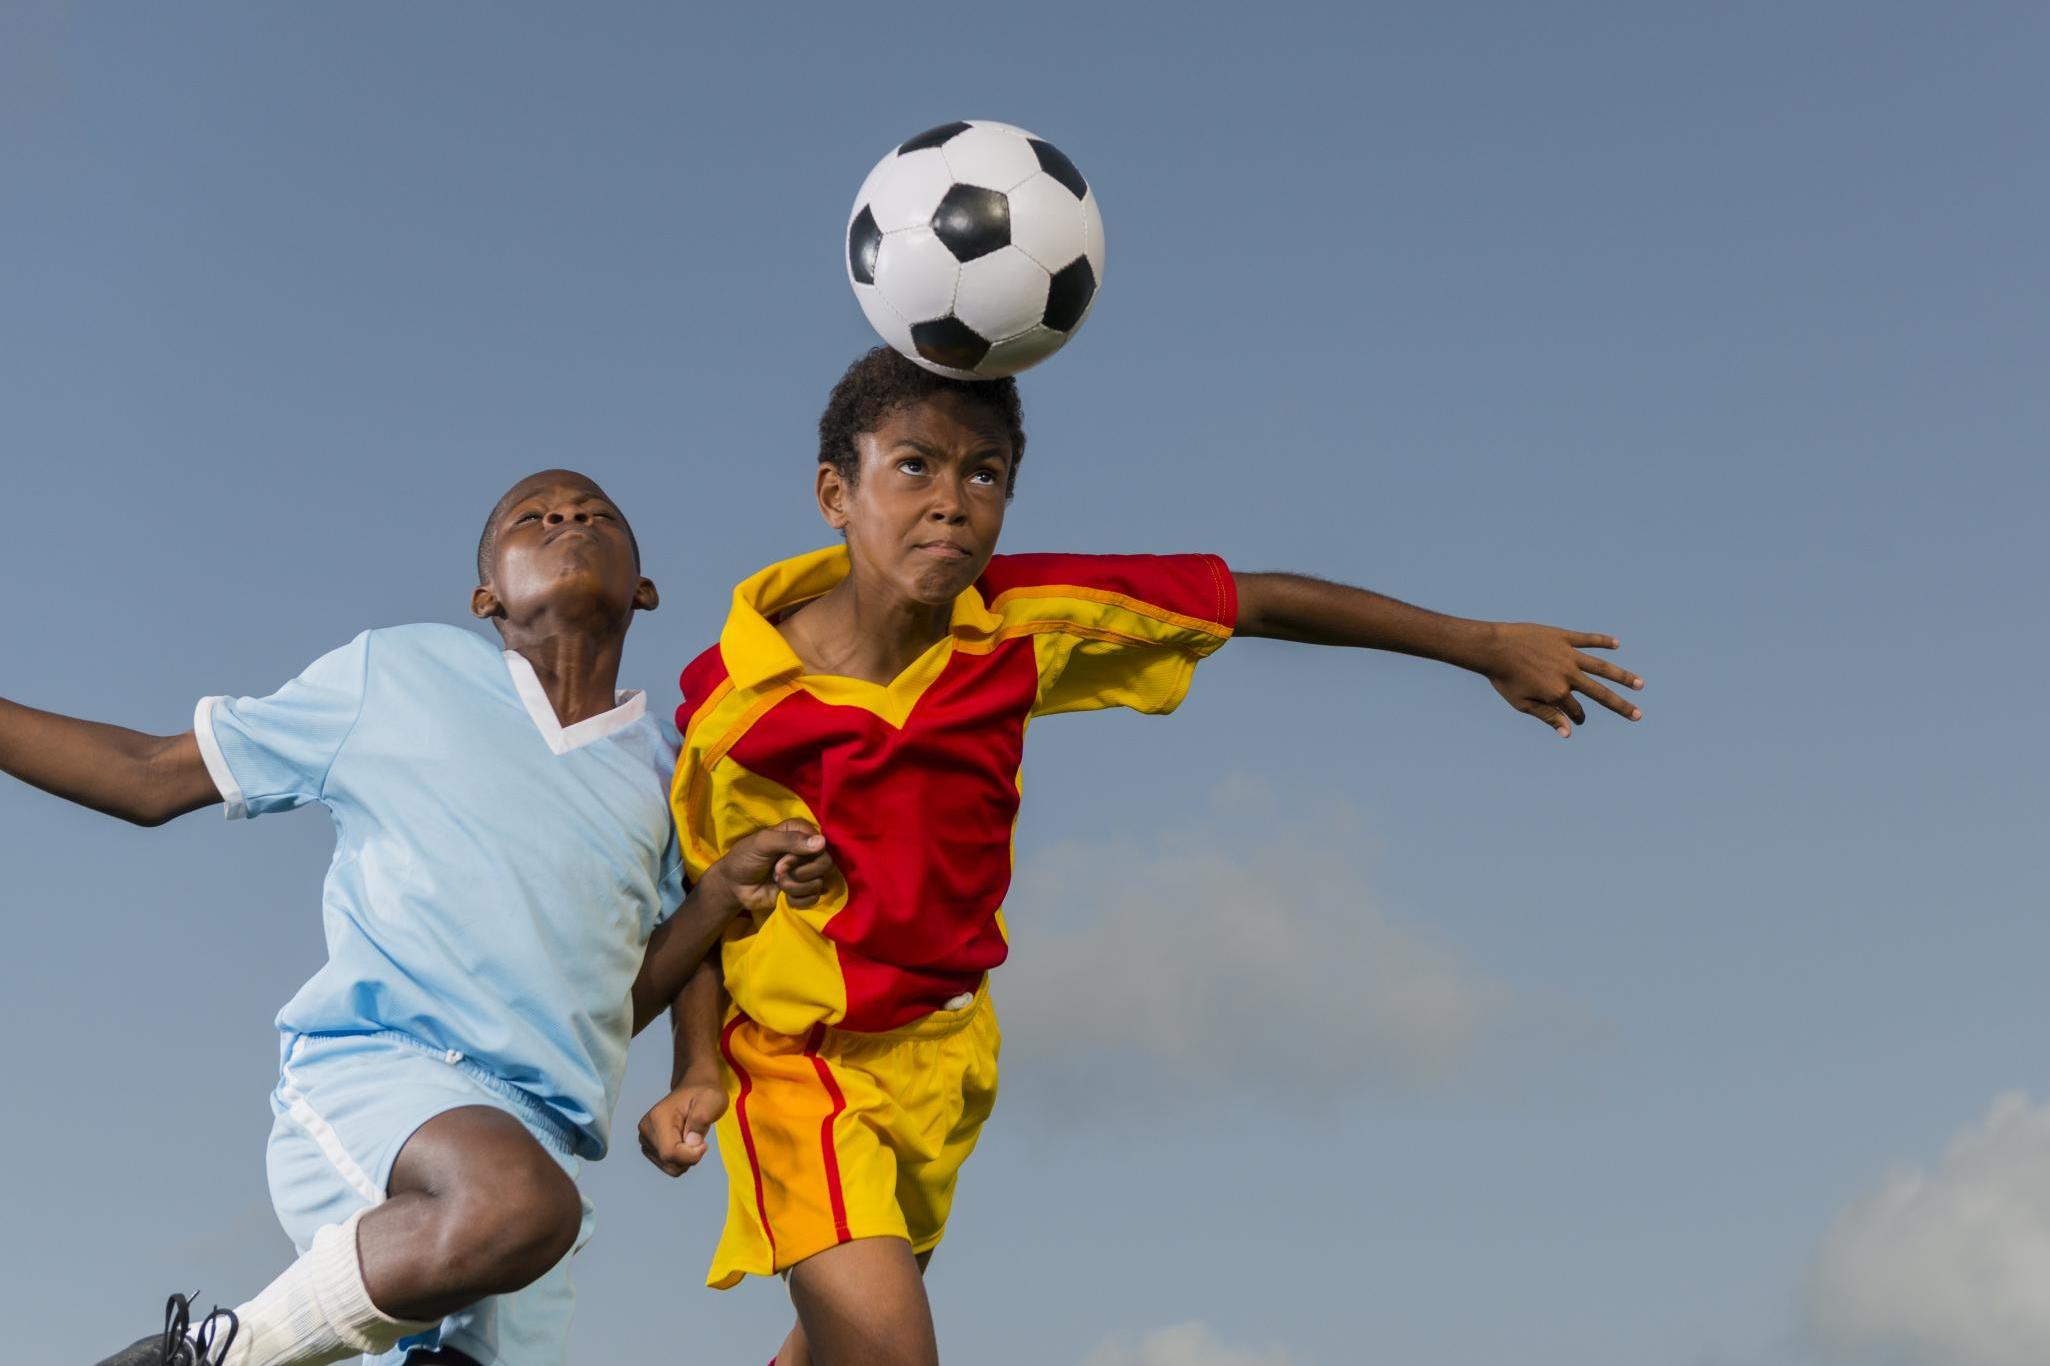 Under-12s can still head the ball in matches